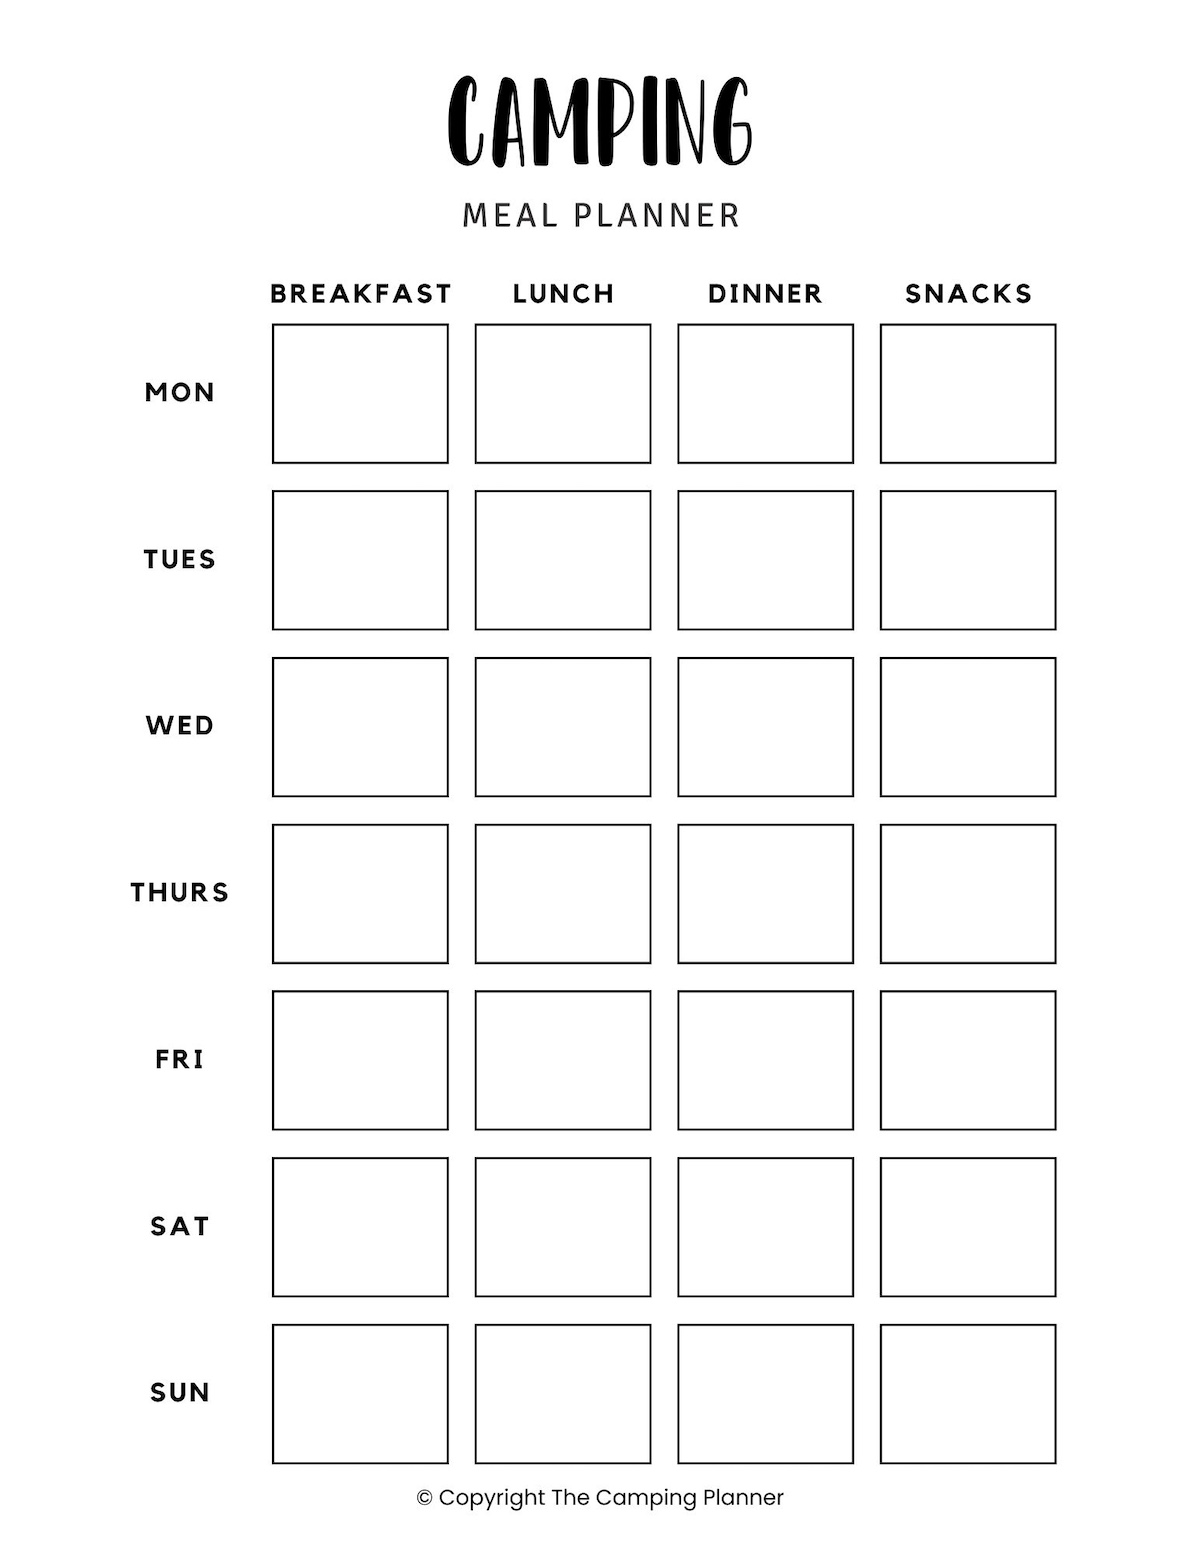 Camping Food Packing List: Free Printable Camping Food Checklist